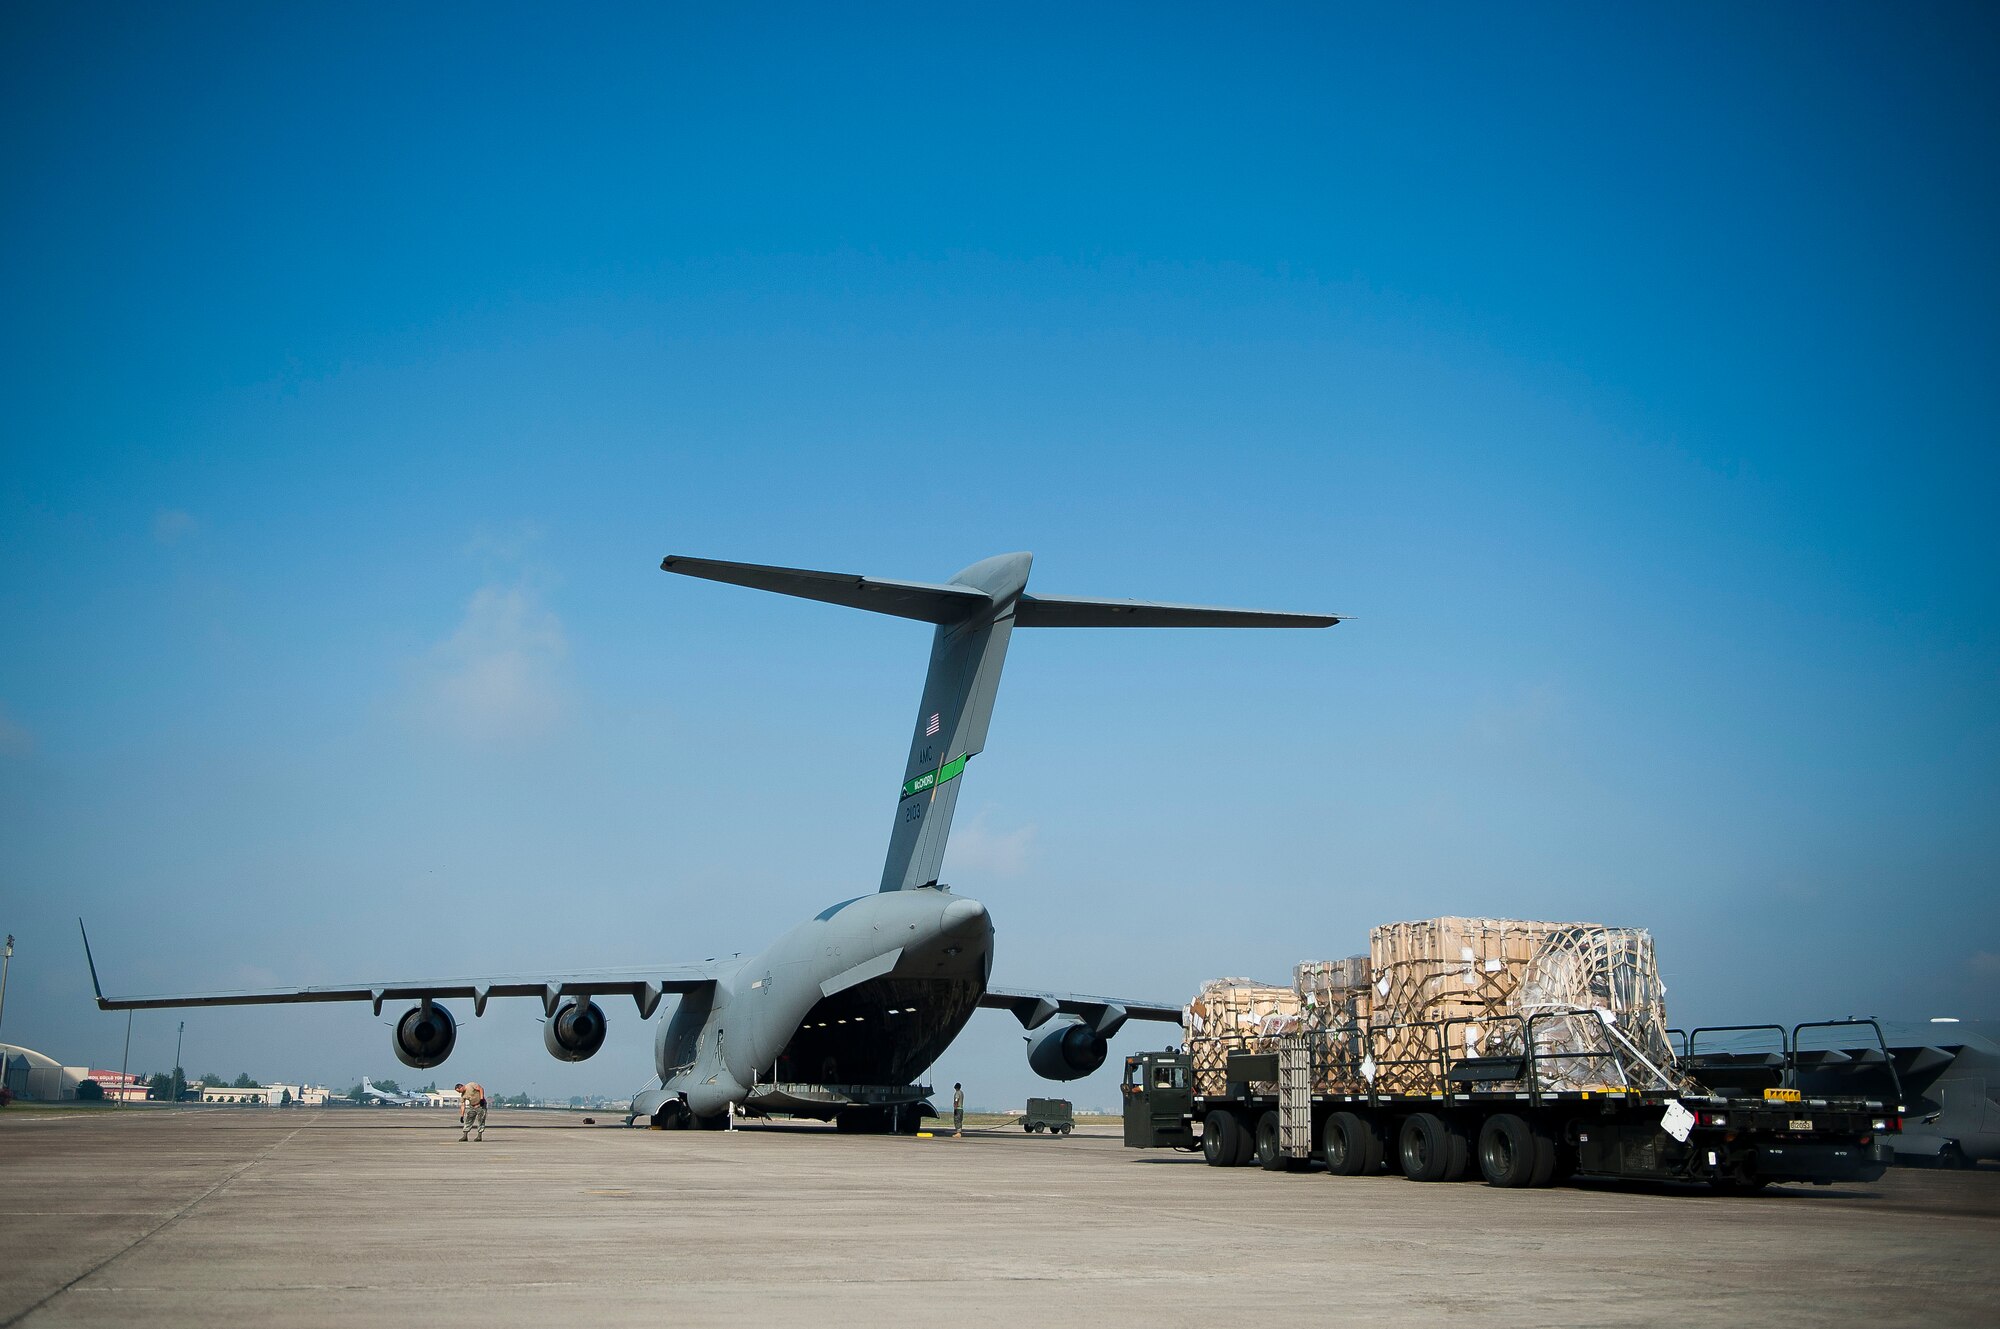 Airmen from the 728th Air Mobility Squadron Aerial Port Flight load cargo onto a C-17 Globemaster III aircraft July 11, 2011, at Incirlik Air Base, Turkey. The aerial port flight is responsible for transportation-related functions including the movement of freight bound for Europe, Africa, and Southwest and Central Asia. (U.S. Air Force photo by Tech. Sgt. Michael B. Keller/Released)